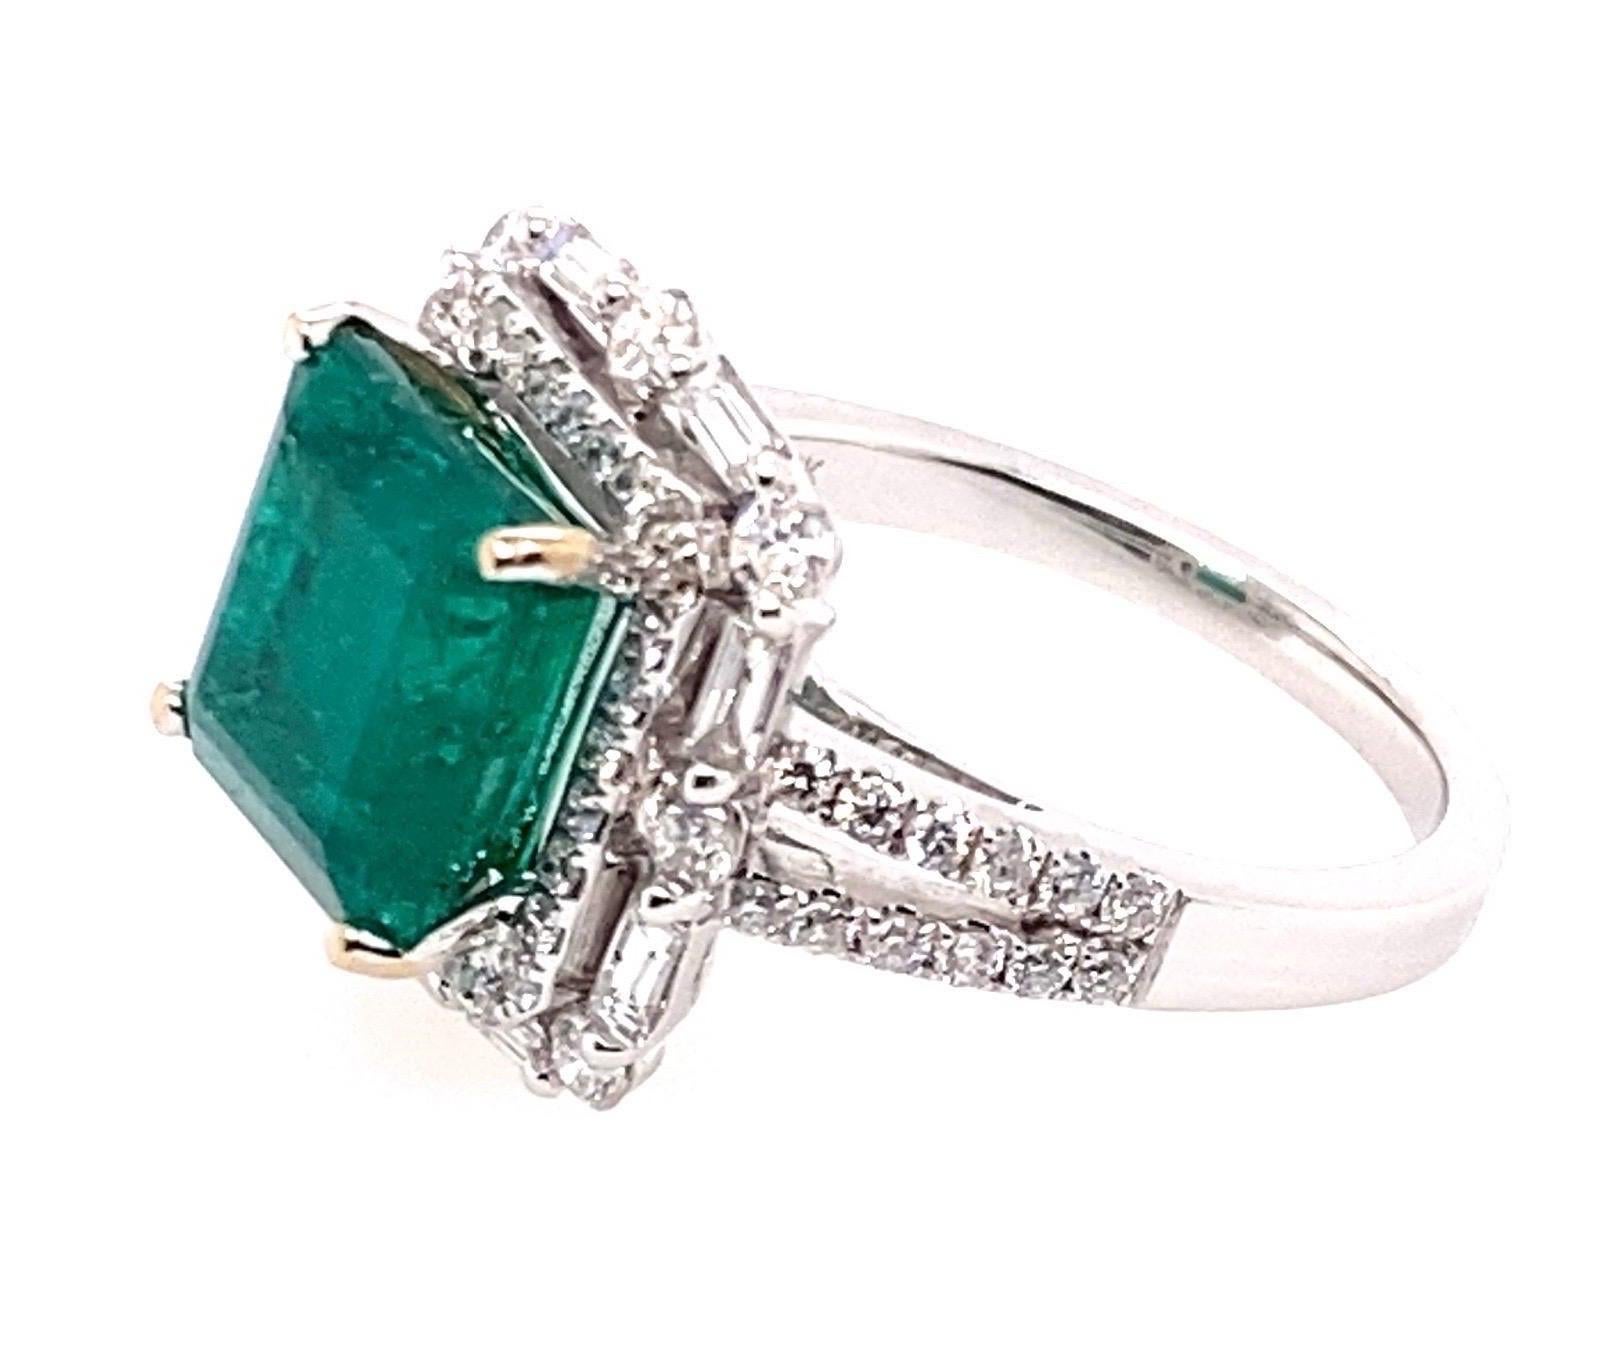 18 Karat White Gold 4.10 Carat Emerald Diamond Cluster Cocktail Ring

Center stone a square emerald set in a four claw setting. There are two rows of diamond surrounding the center stone forming a double cluster head. The emerald sits 8.40mm in